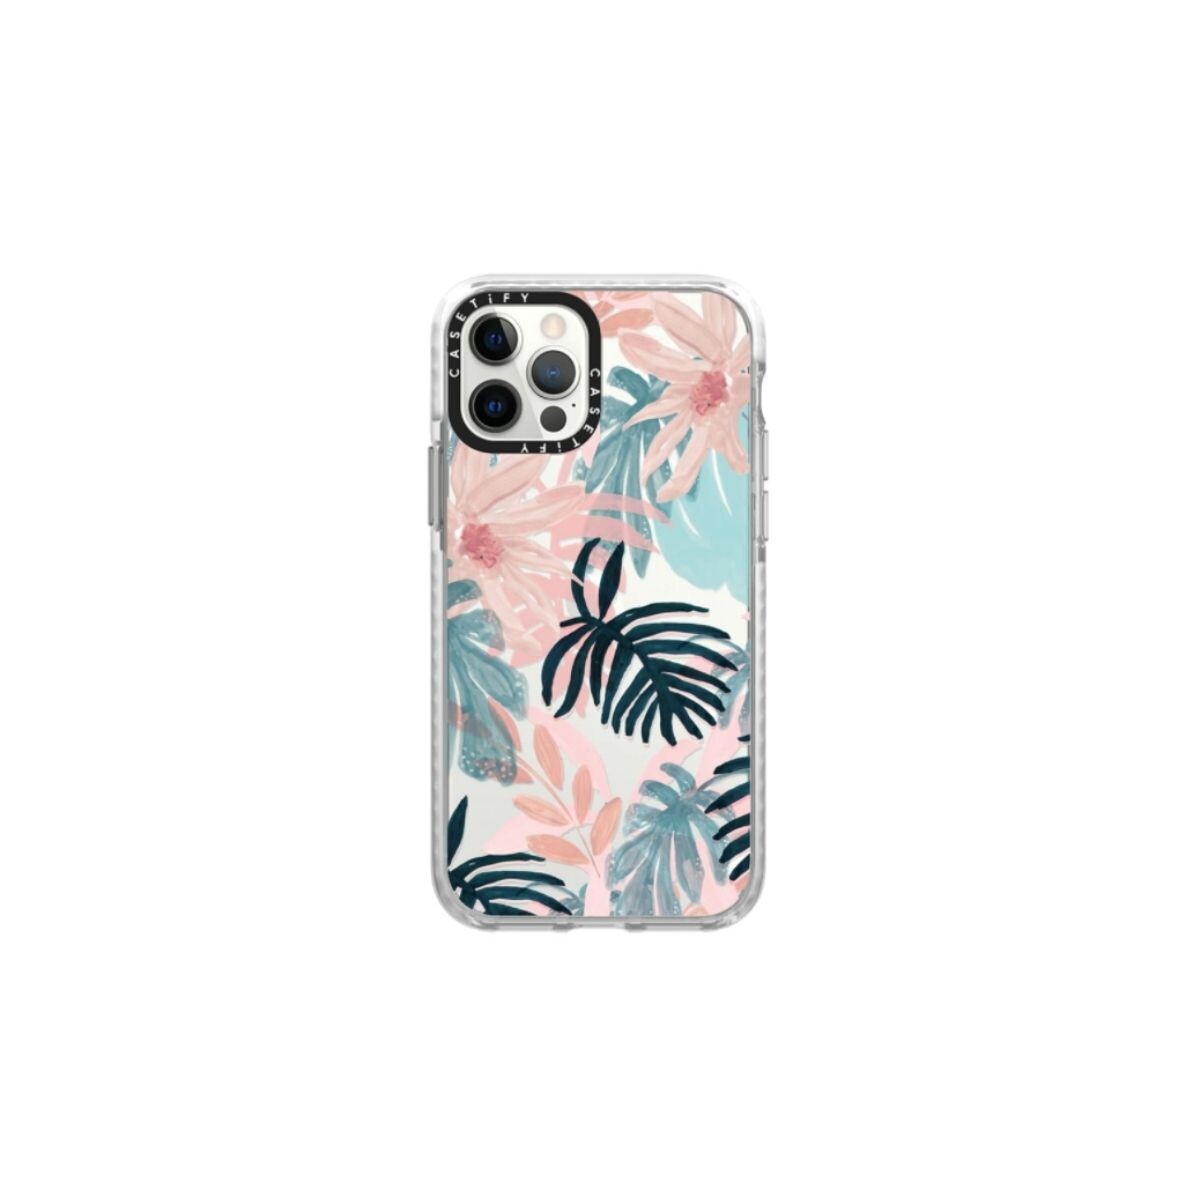 Protector Casetify Para Iphone X y XS 